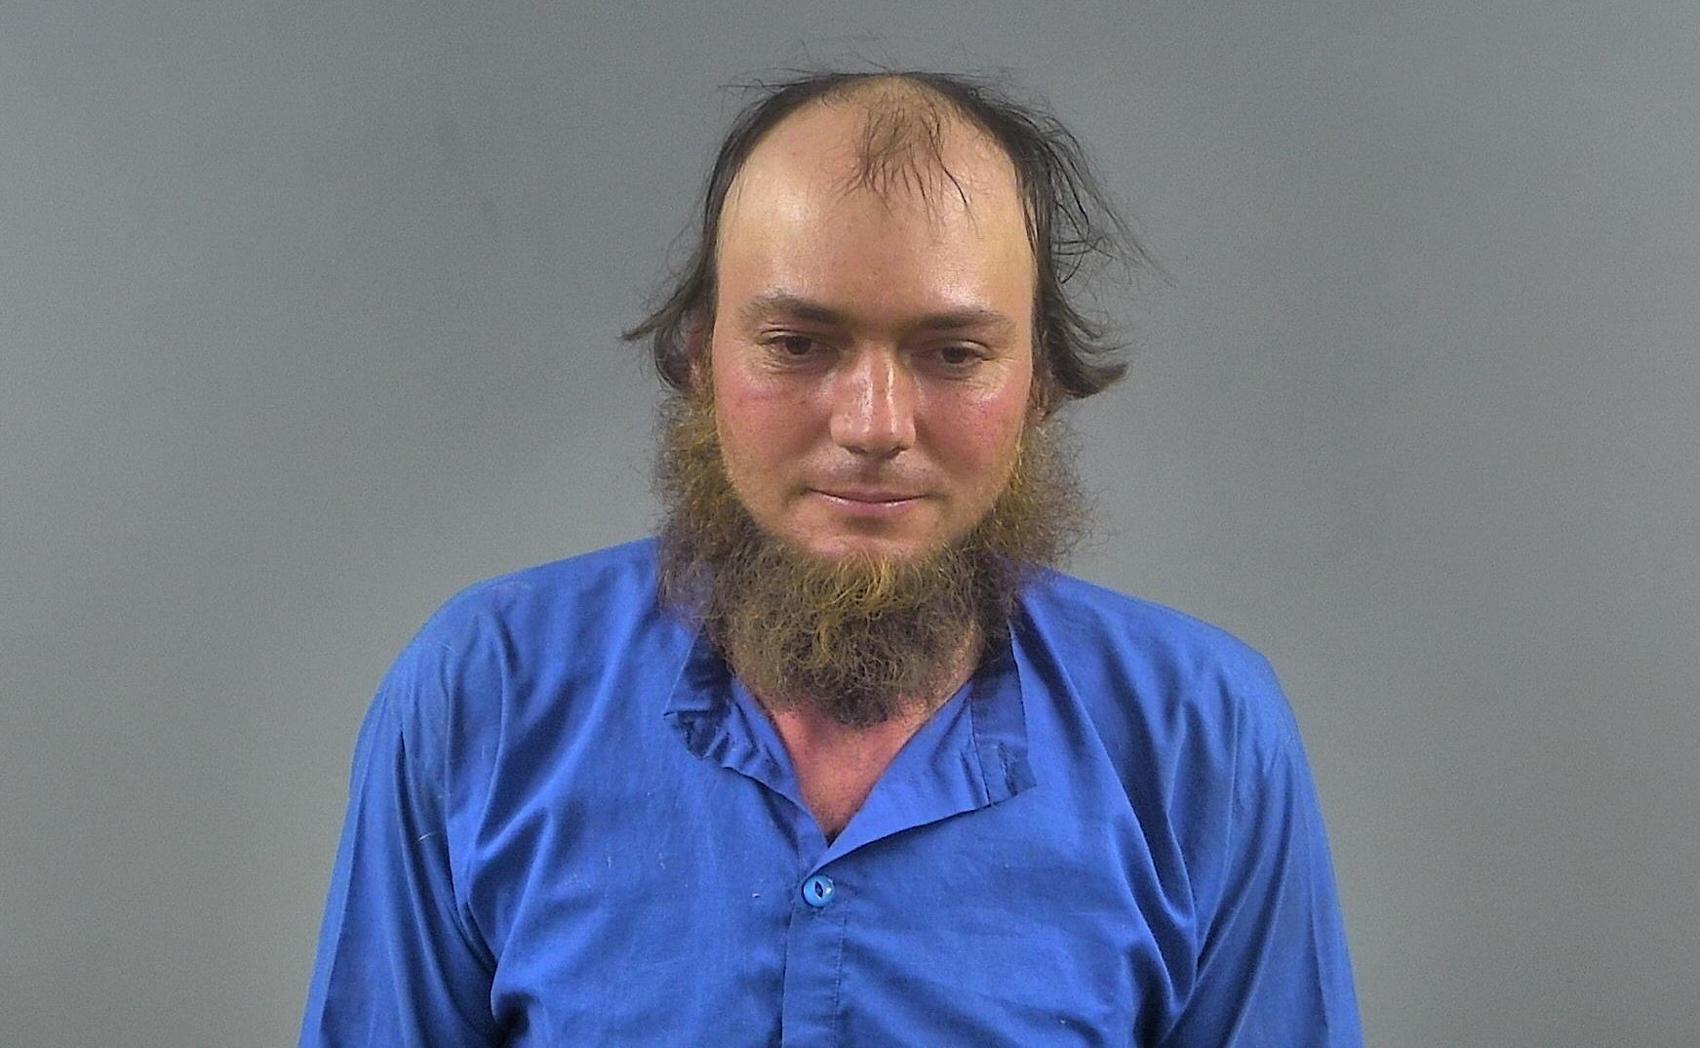 Reuben Yoder, 34, was arrested on 10 felony counts after police in Kentucky accused him of drinking and driving in a horse-drawn carriage that crashed into a vehicle.